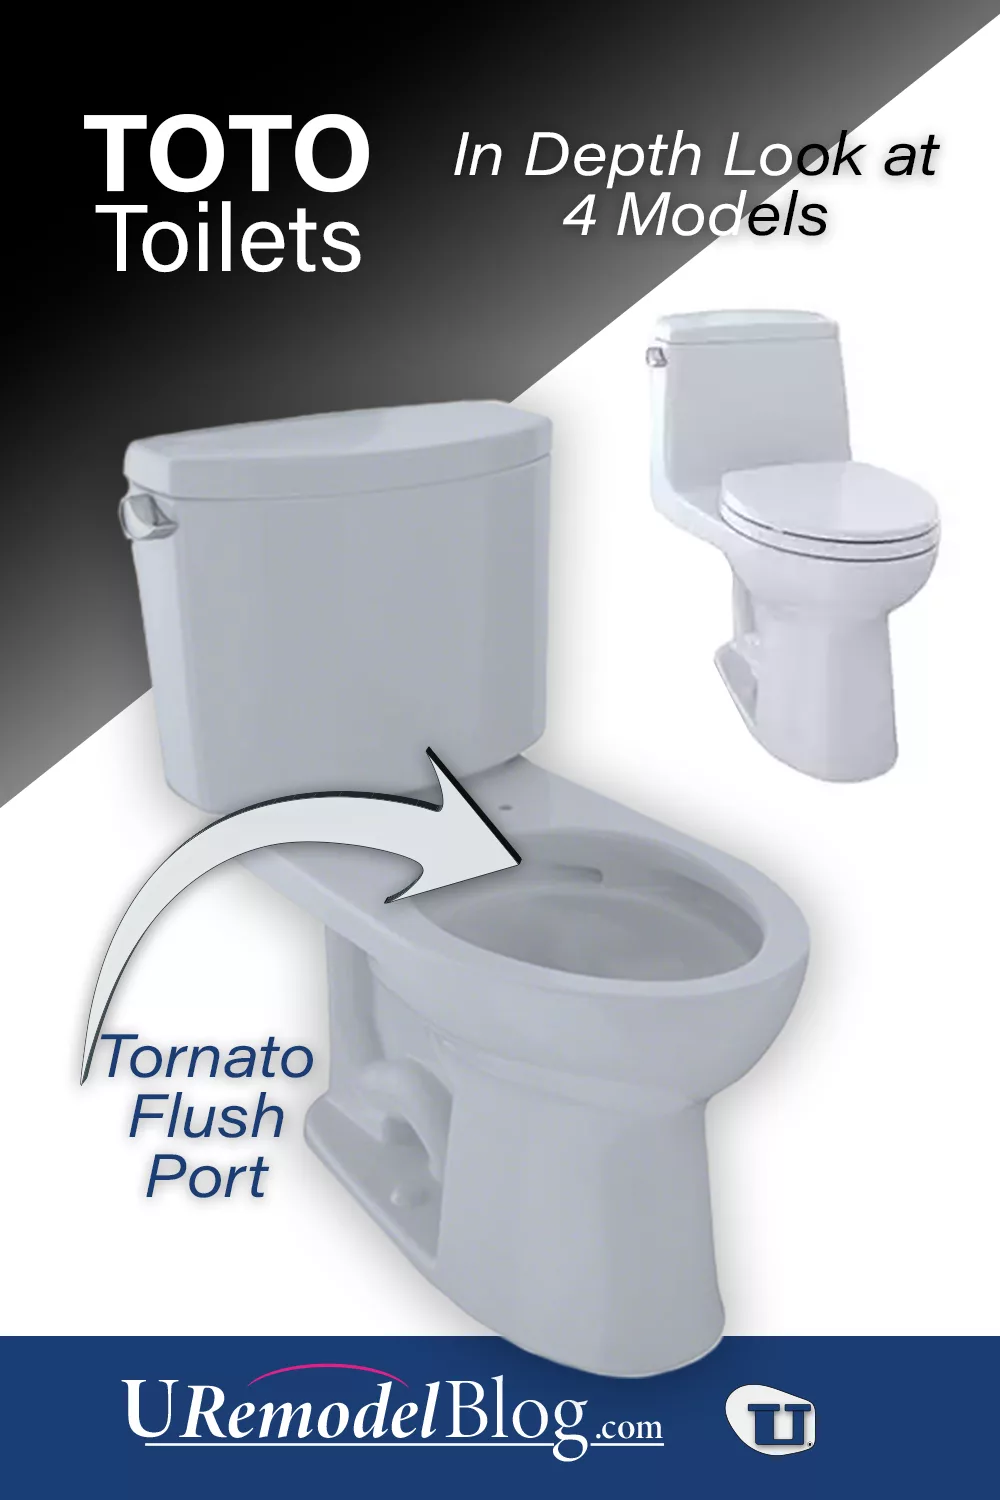 3 Toilets by TOTO